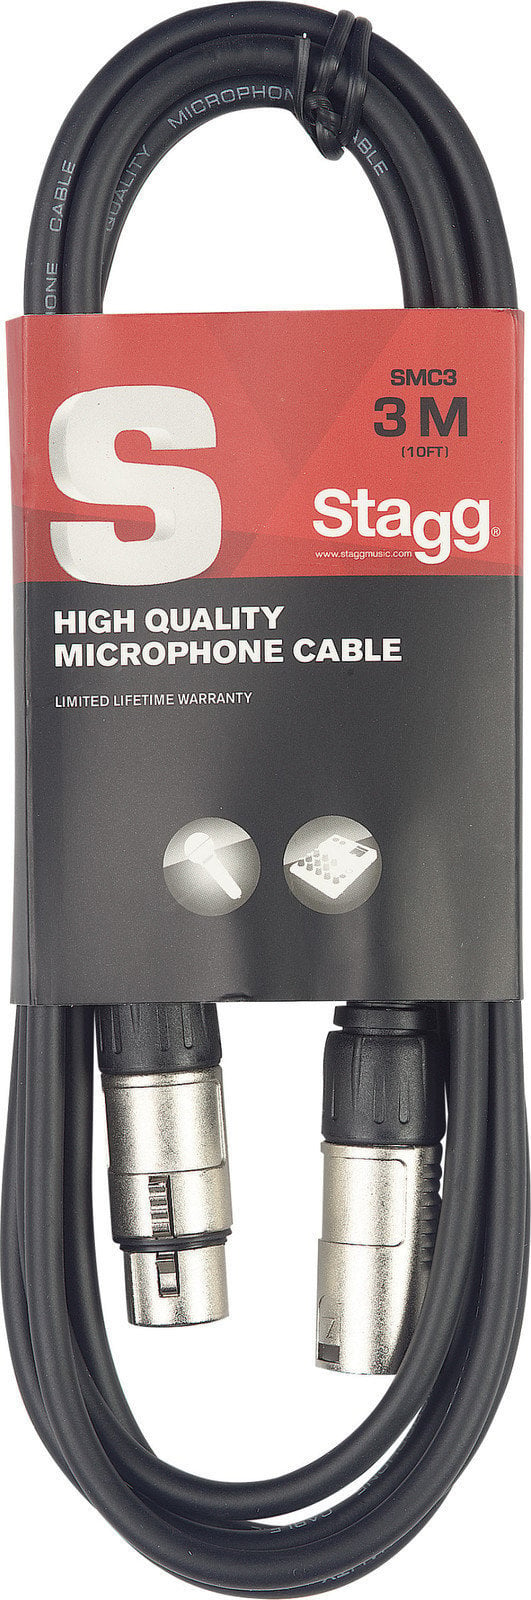 Microphone Cable Stagg SMC3 Black 3 m